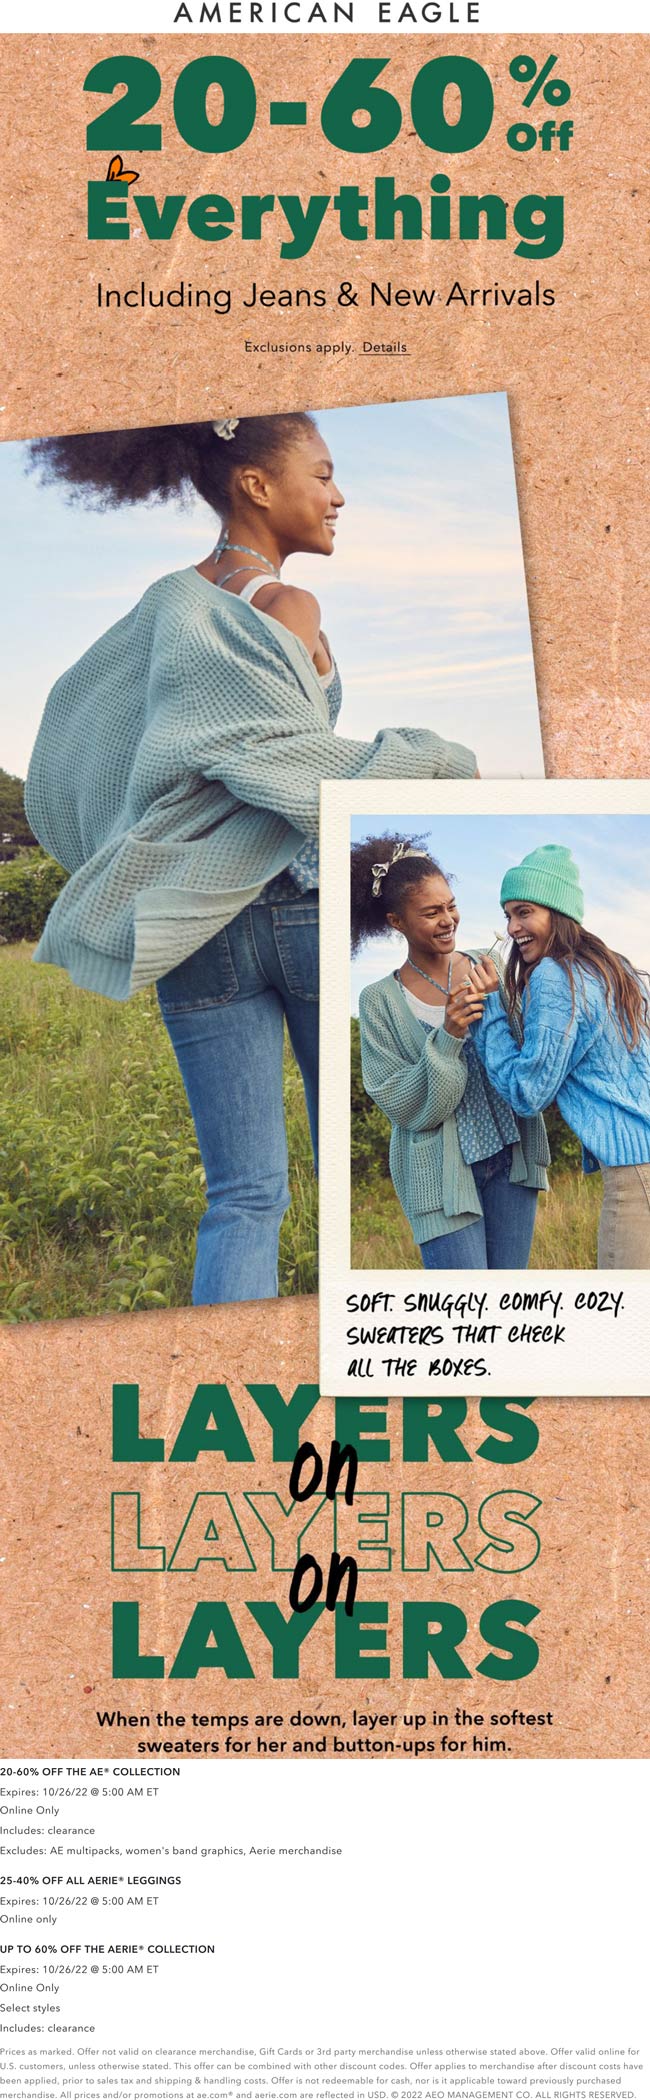 American Eagle stores Coupon  20-60% off everything at American Eagle #americaneagle 